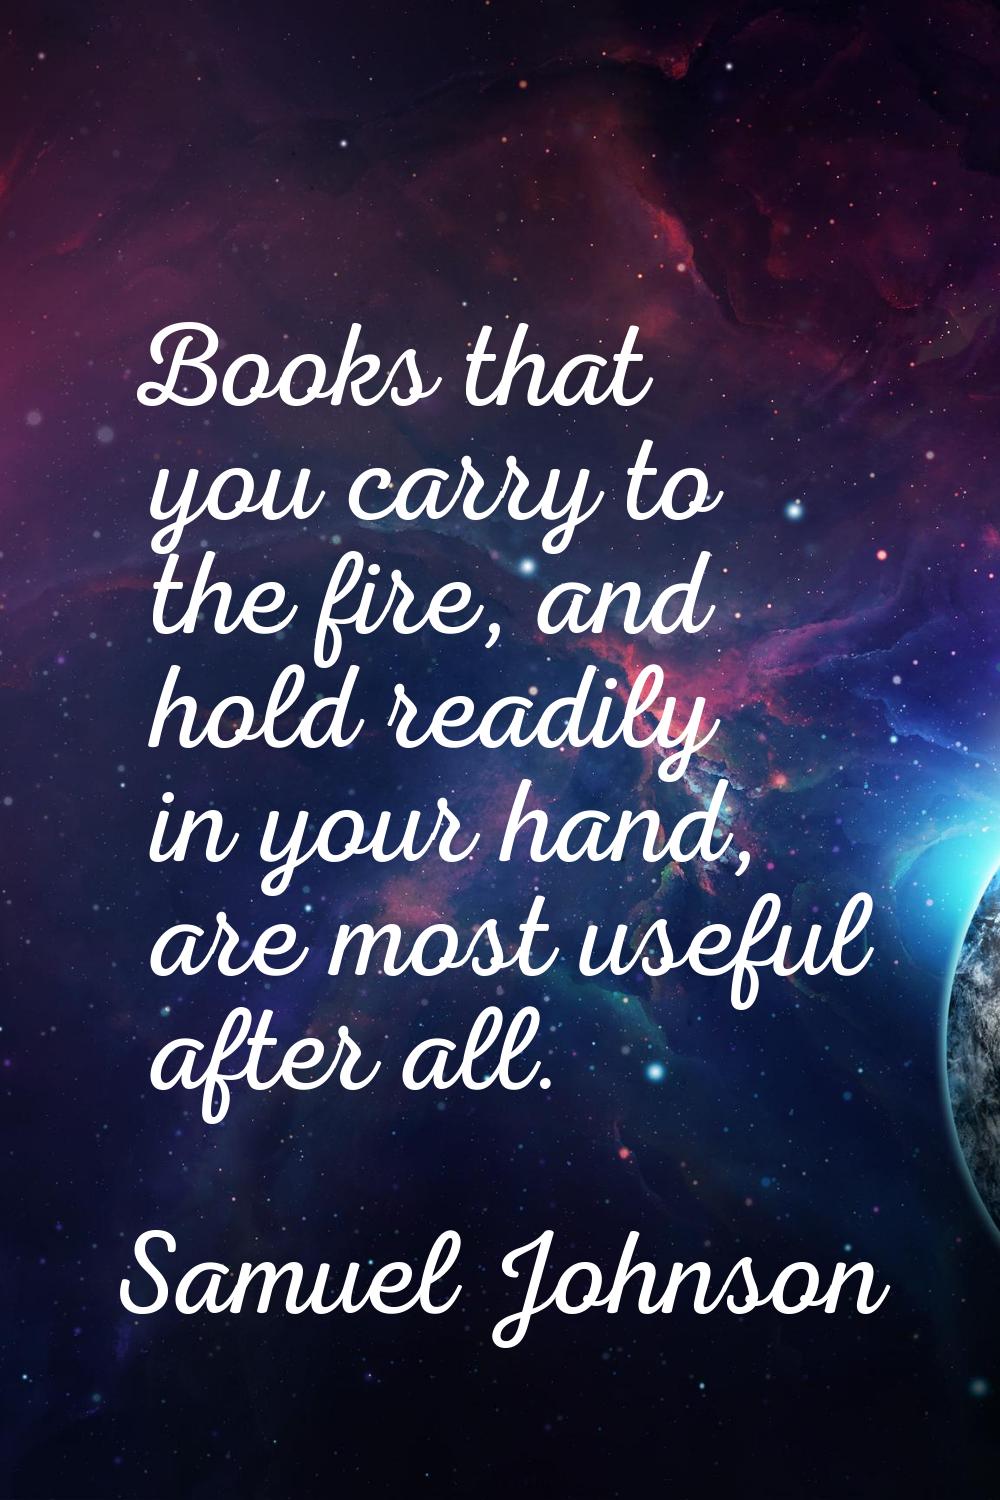 Books that you carry to the fire, and hold readily in your hand, are most useful after all.